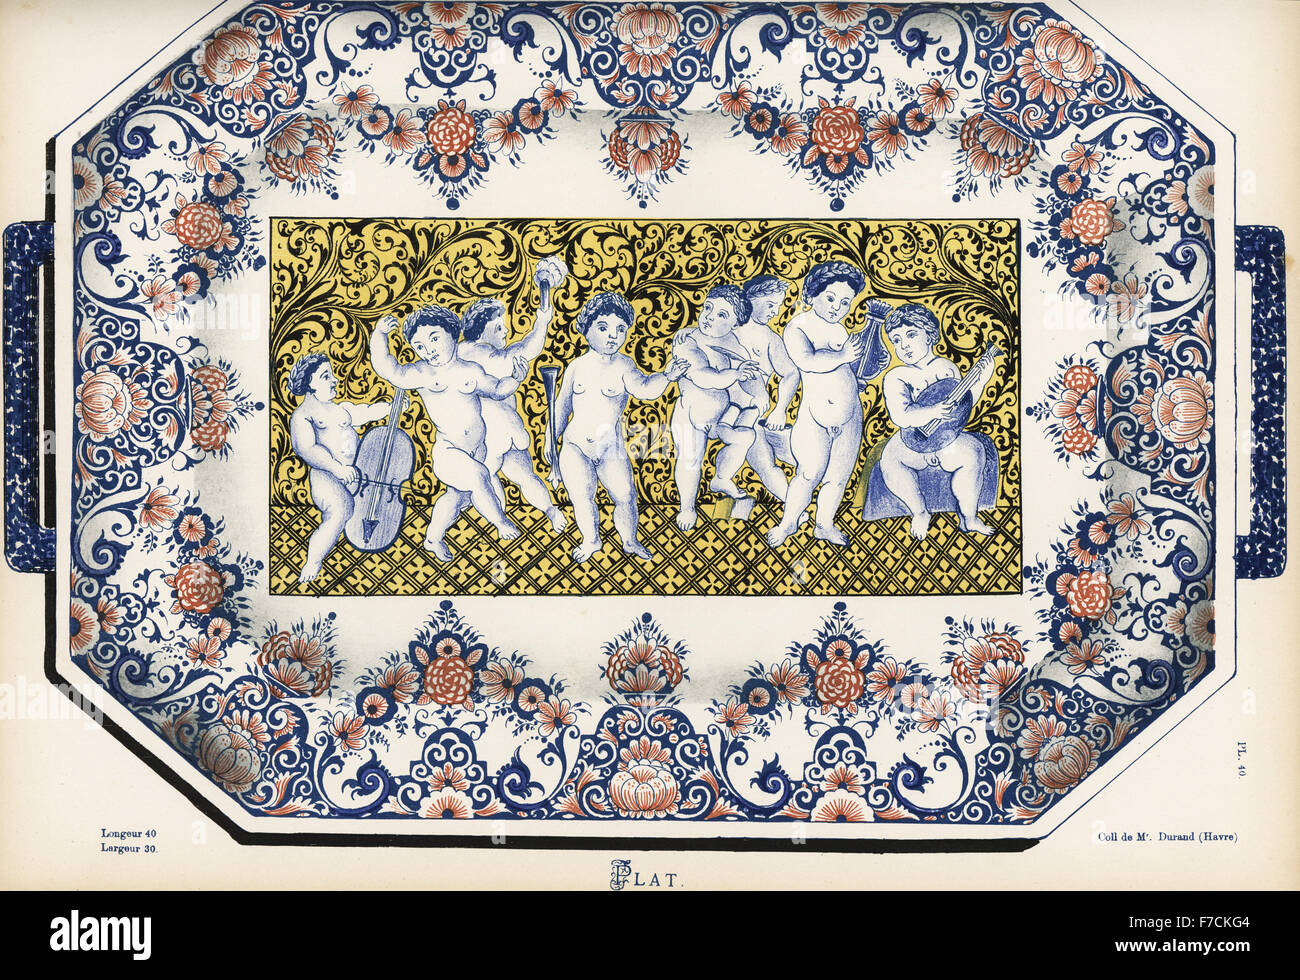 Decorative rectangular plate from Rouen with handles. Painted with six putti in laurel wreaths with cello, lute, lyre, quill, torch on a gold ground, bordered with foliage. Hand-finished chromolithograph from Ris Paquot's General History of Ancient French and Foreign Glazed Pottery, Chez l'Auteur, Paris, 1874. Stock Photo